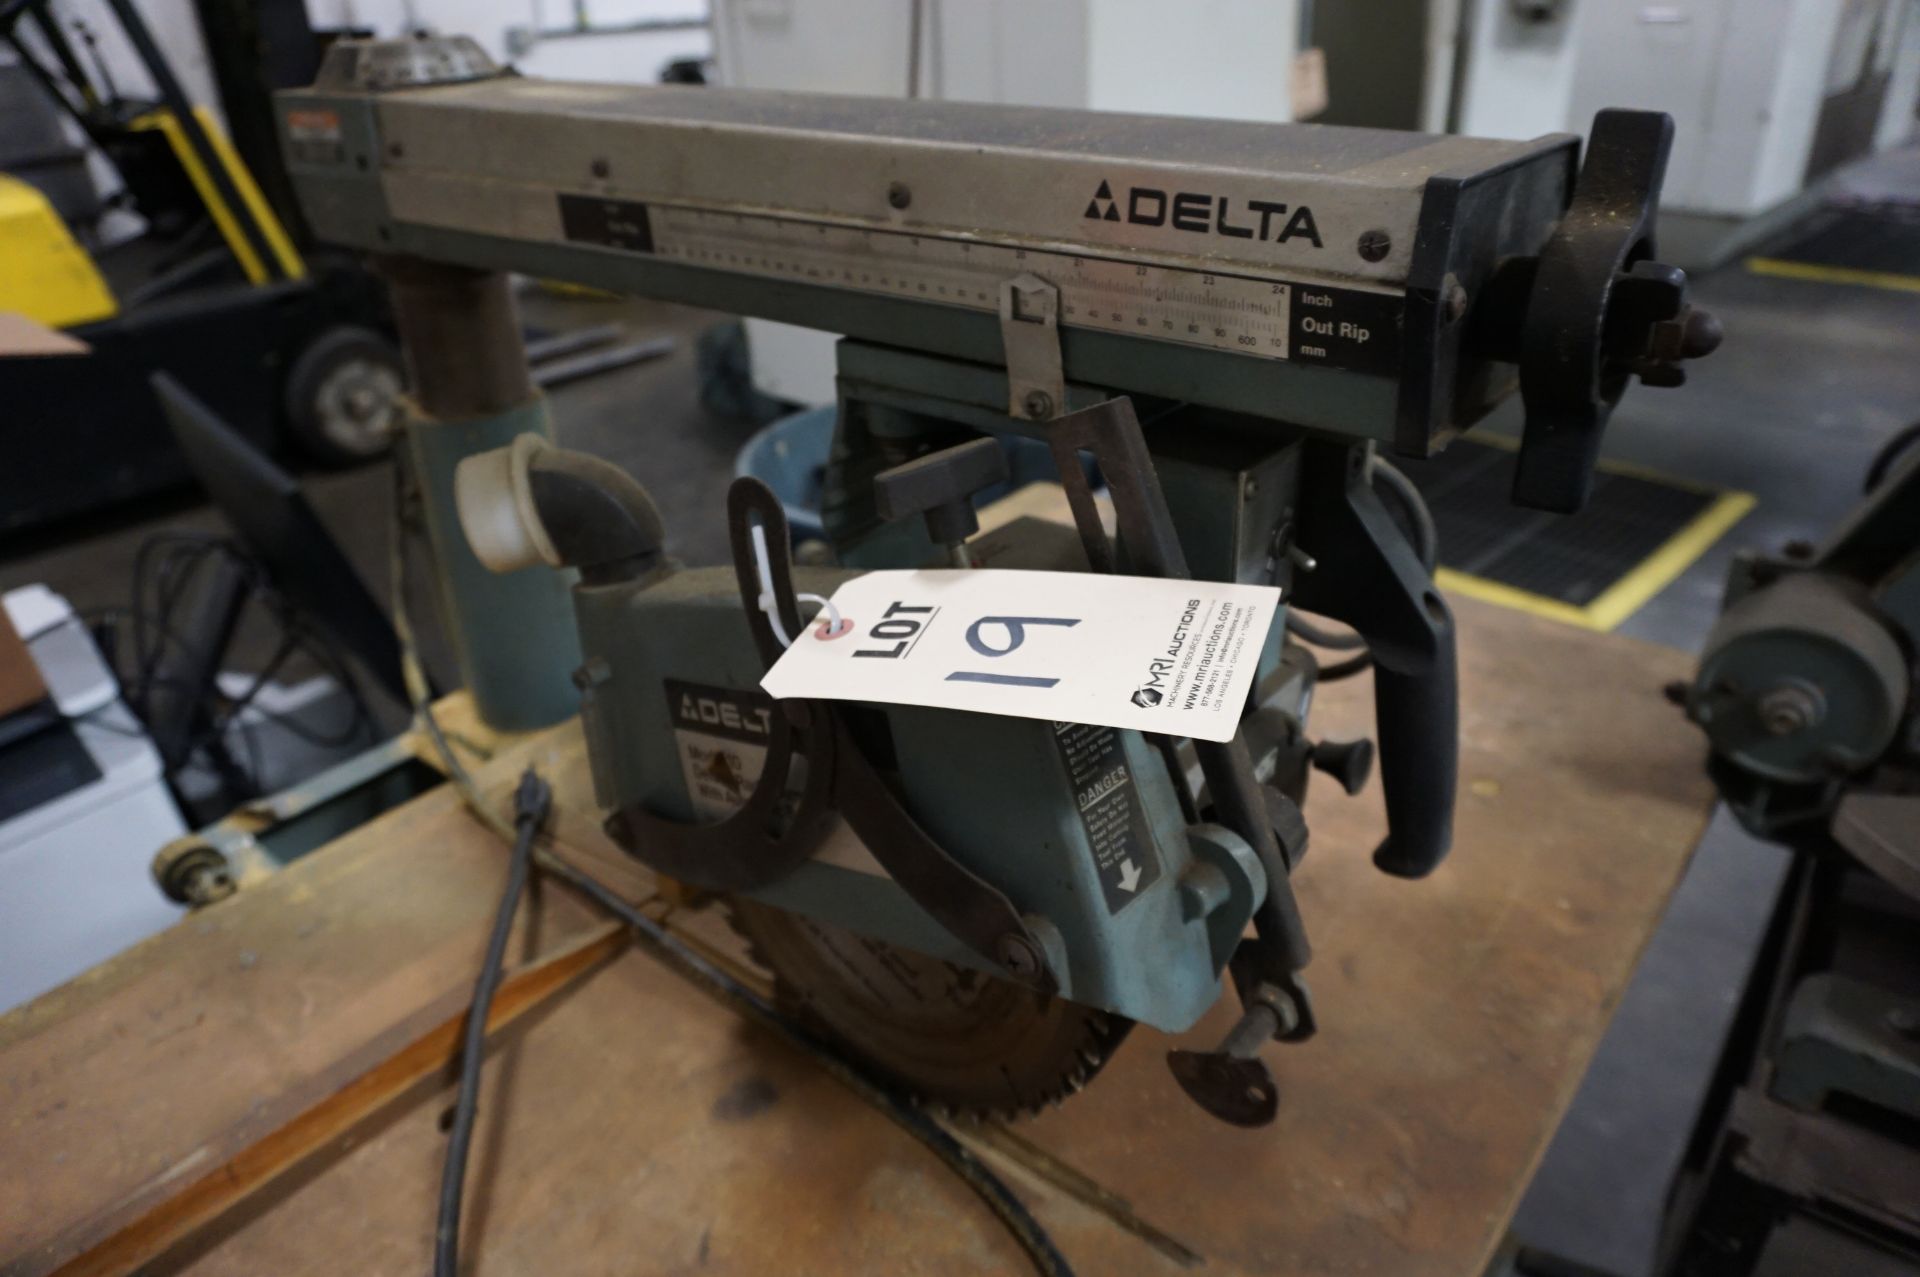 LOT TO INCLUDE: DELTA MODEL 10 RADIAL ARM TABLE SAW, DELTA 10" MITER SAW MODEL 34-080 - Image 2 of 6